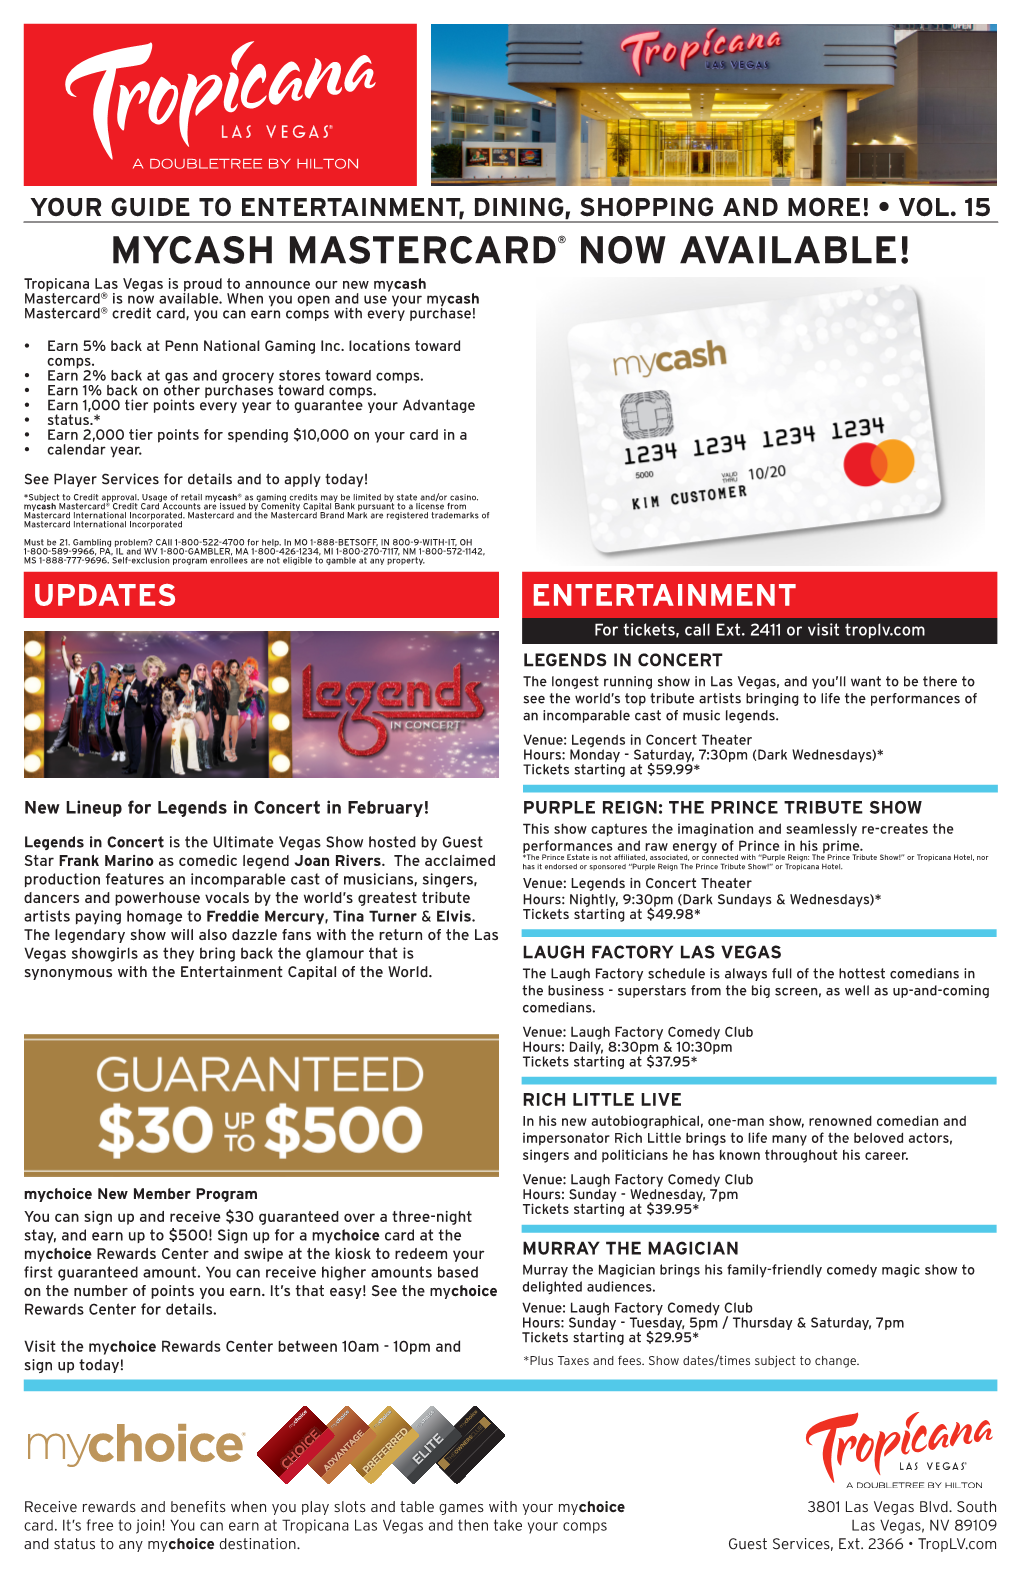 MYCASH MASTERCARD® NOW AVAILABLE! Tropicana Las Vegas Is Proud to Announce Our New Mycash Mastercard® Is Now Available